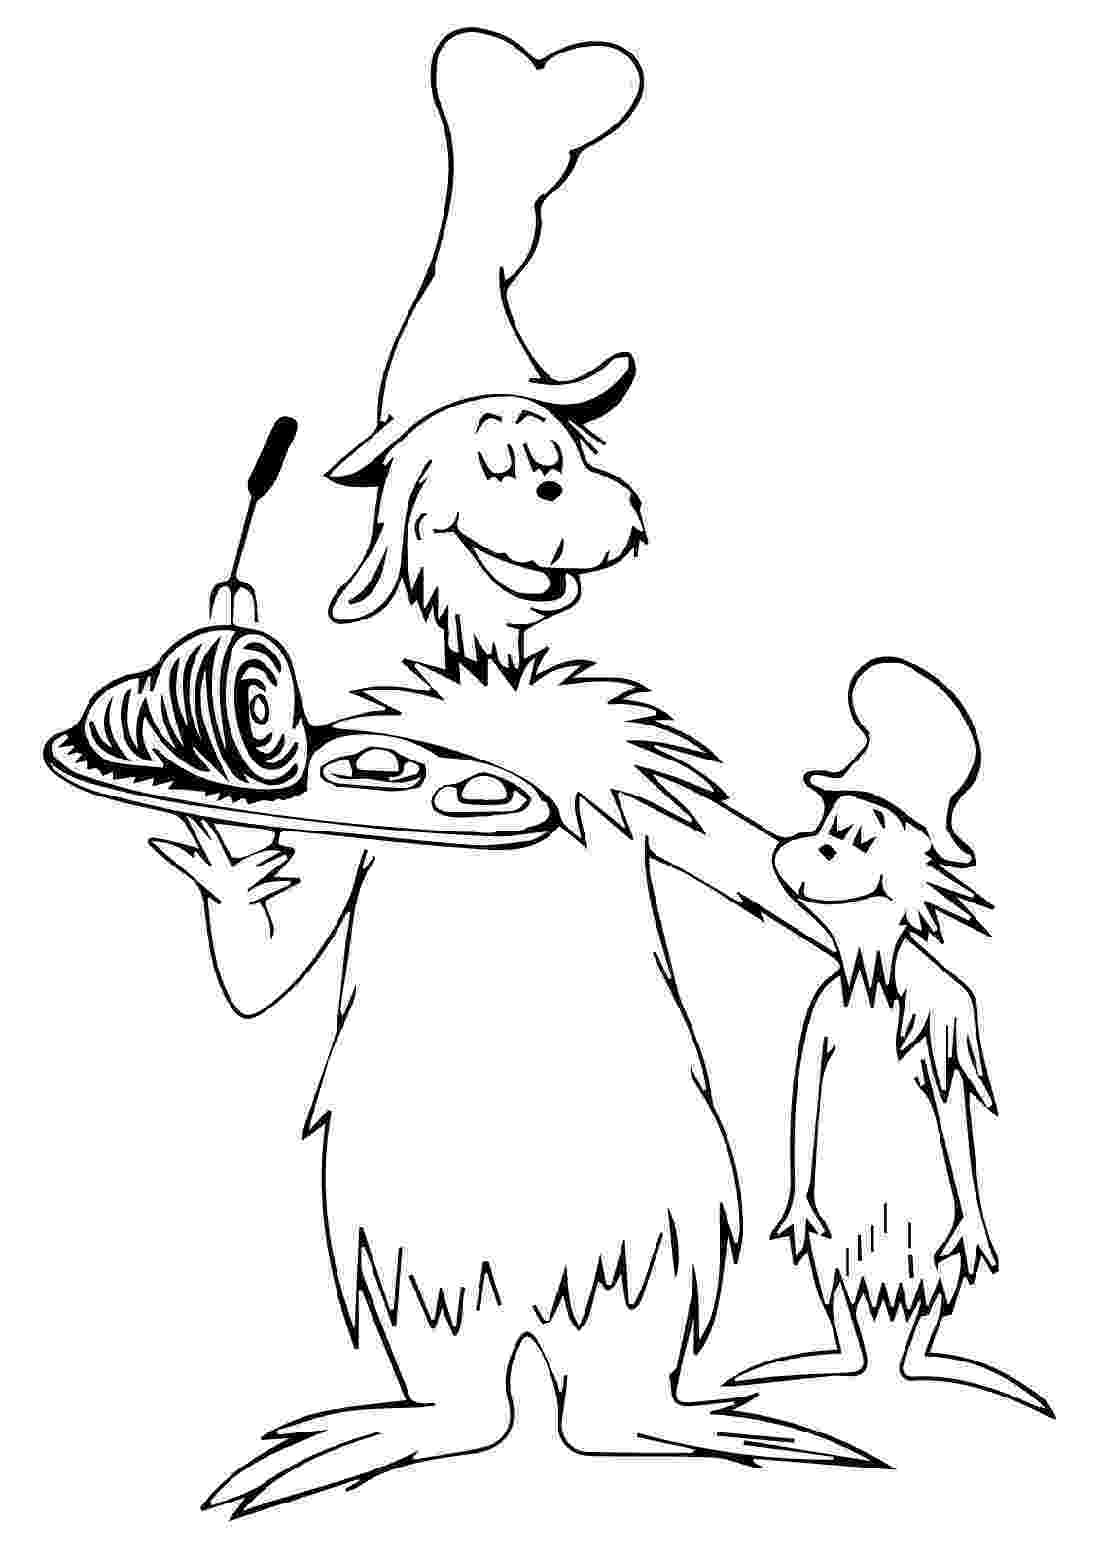 dr seuss coloring pages green eggs and ham dr seuss green eggs and ham coloring pages get coloring eggs dr coloring pages seuss ham and green 